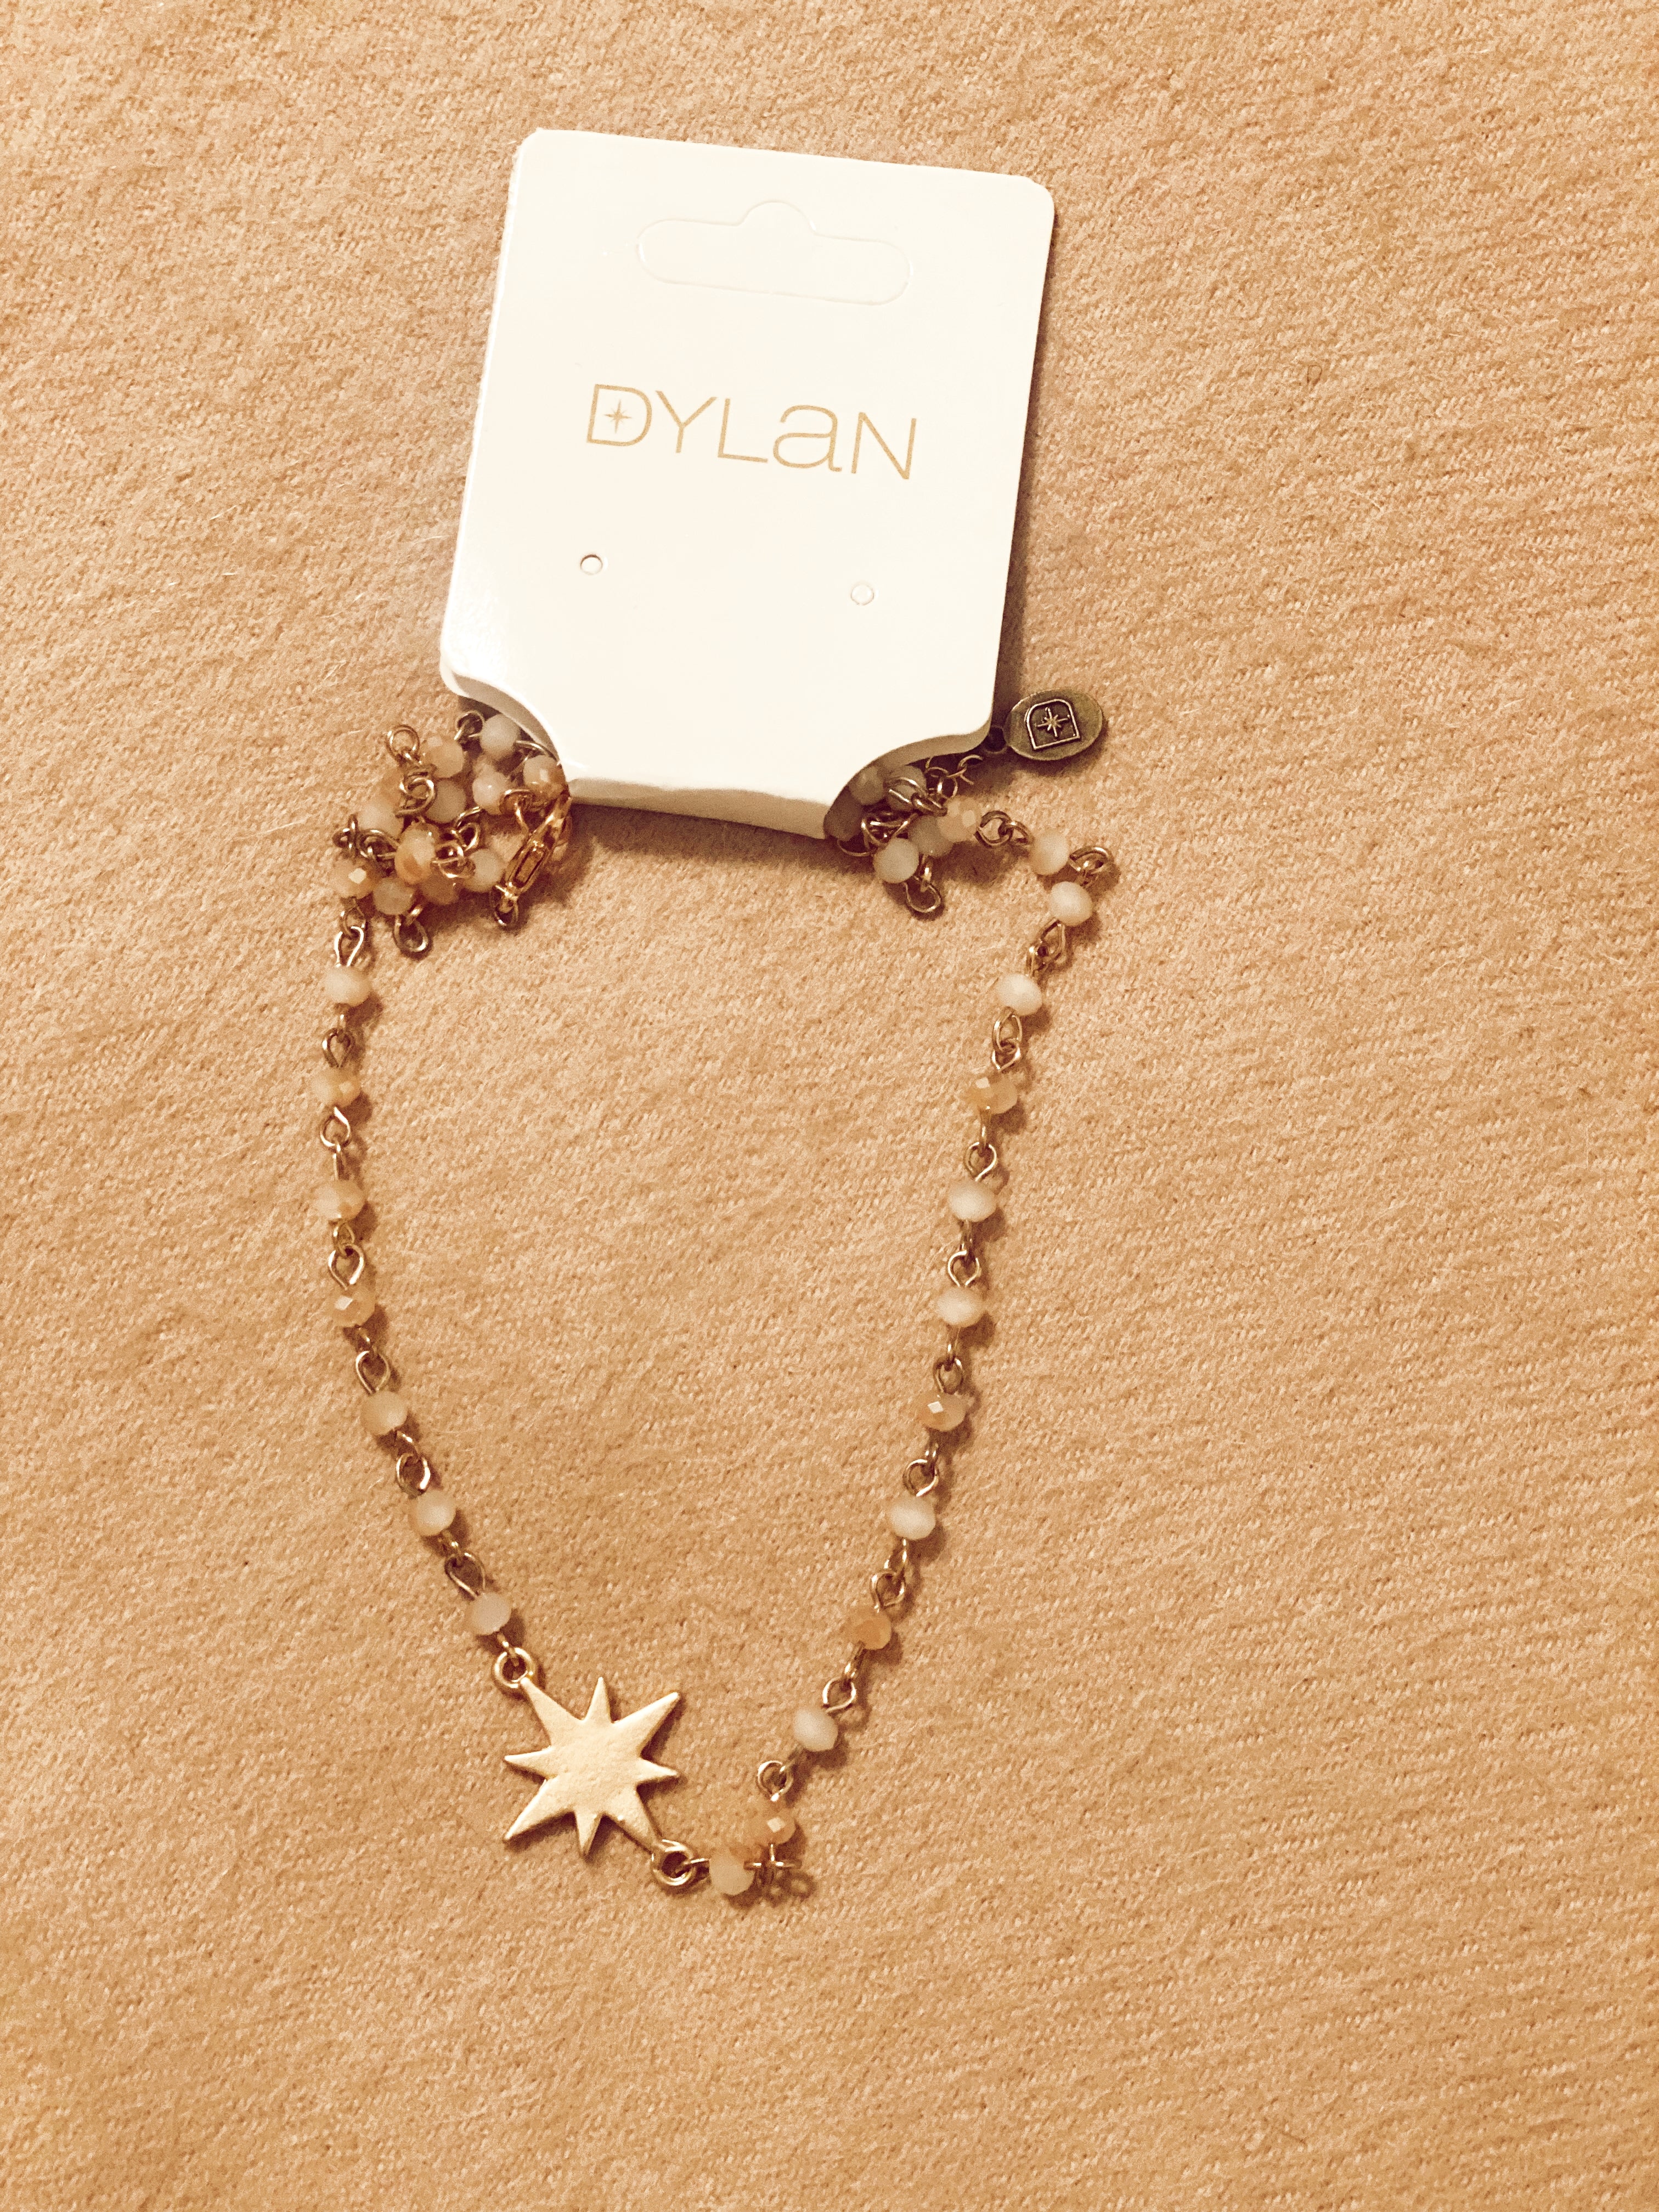 Dylan’s Star Necklace Turquoise Traveler 